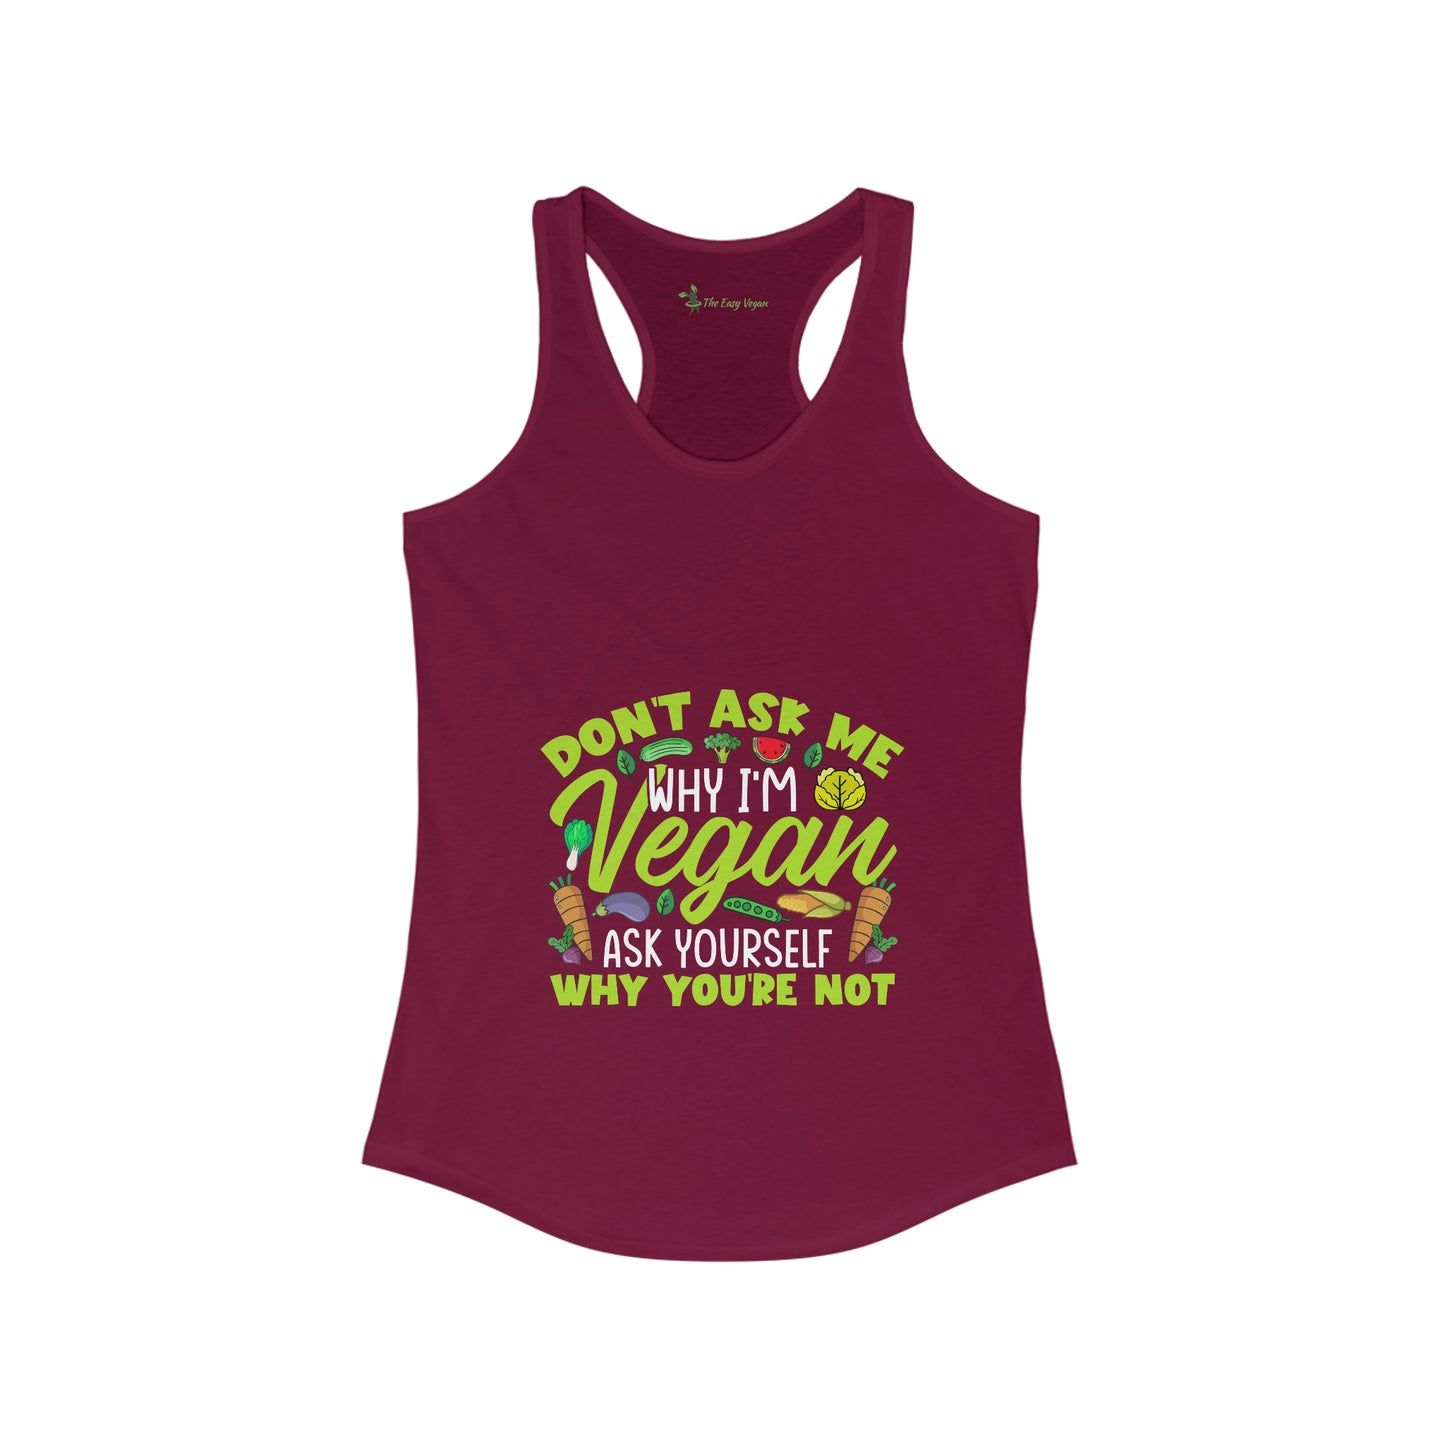 Don't Ask me Why I'm Vegan,Ask yourself why your NOT - Women's Tank